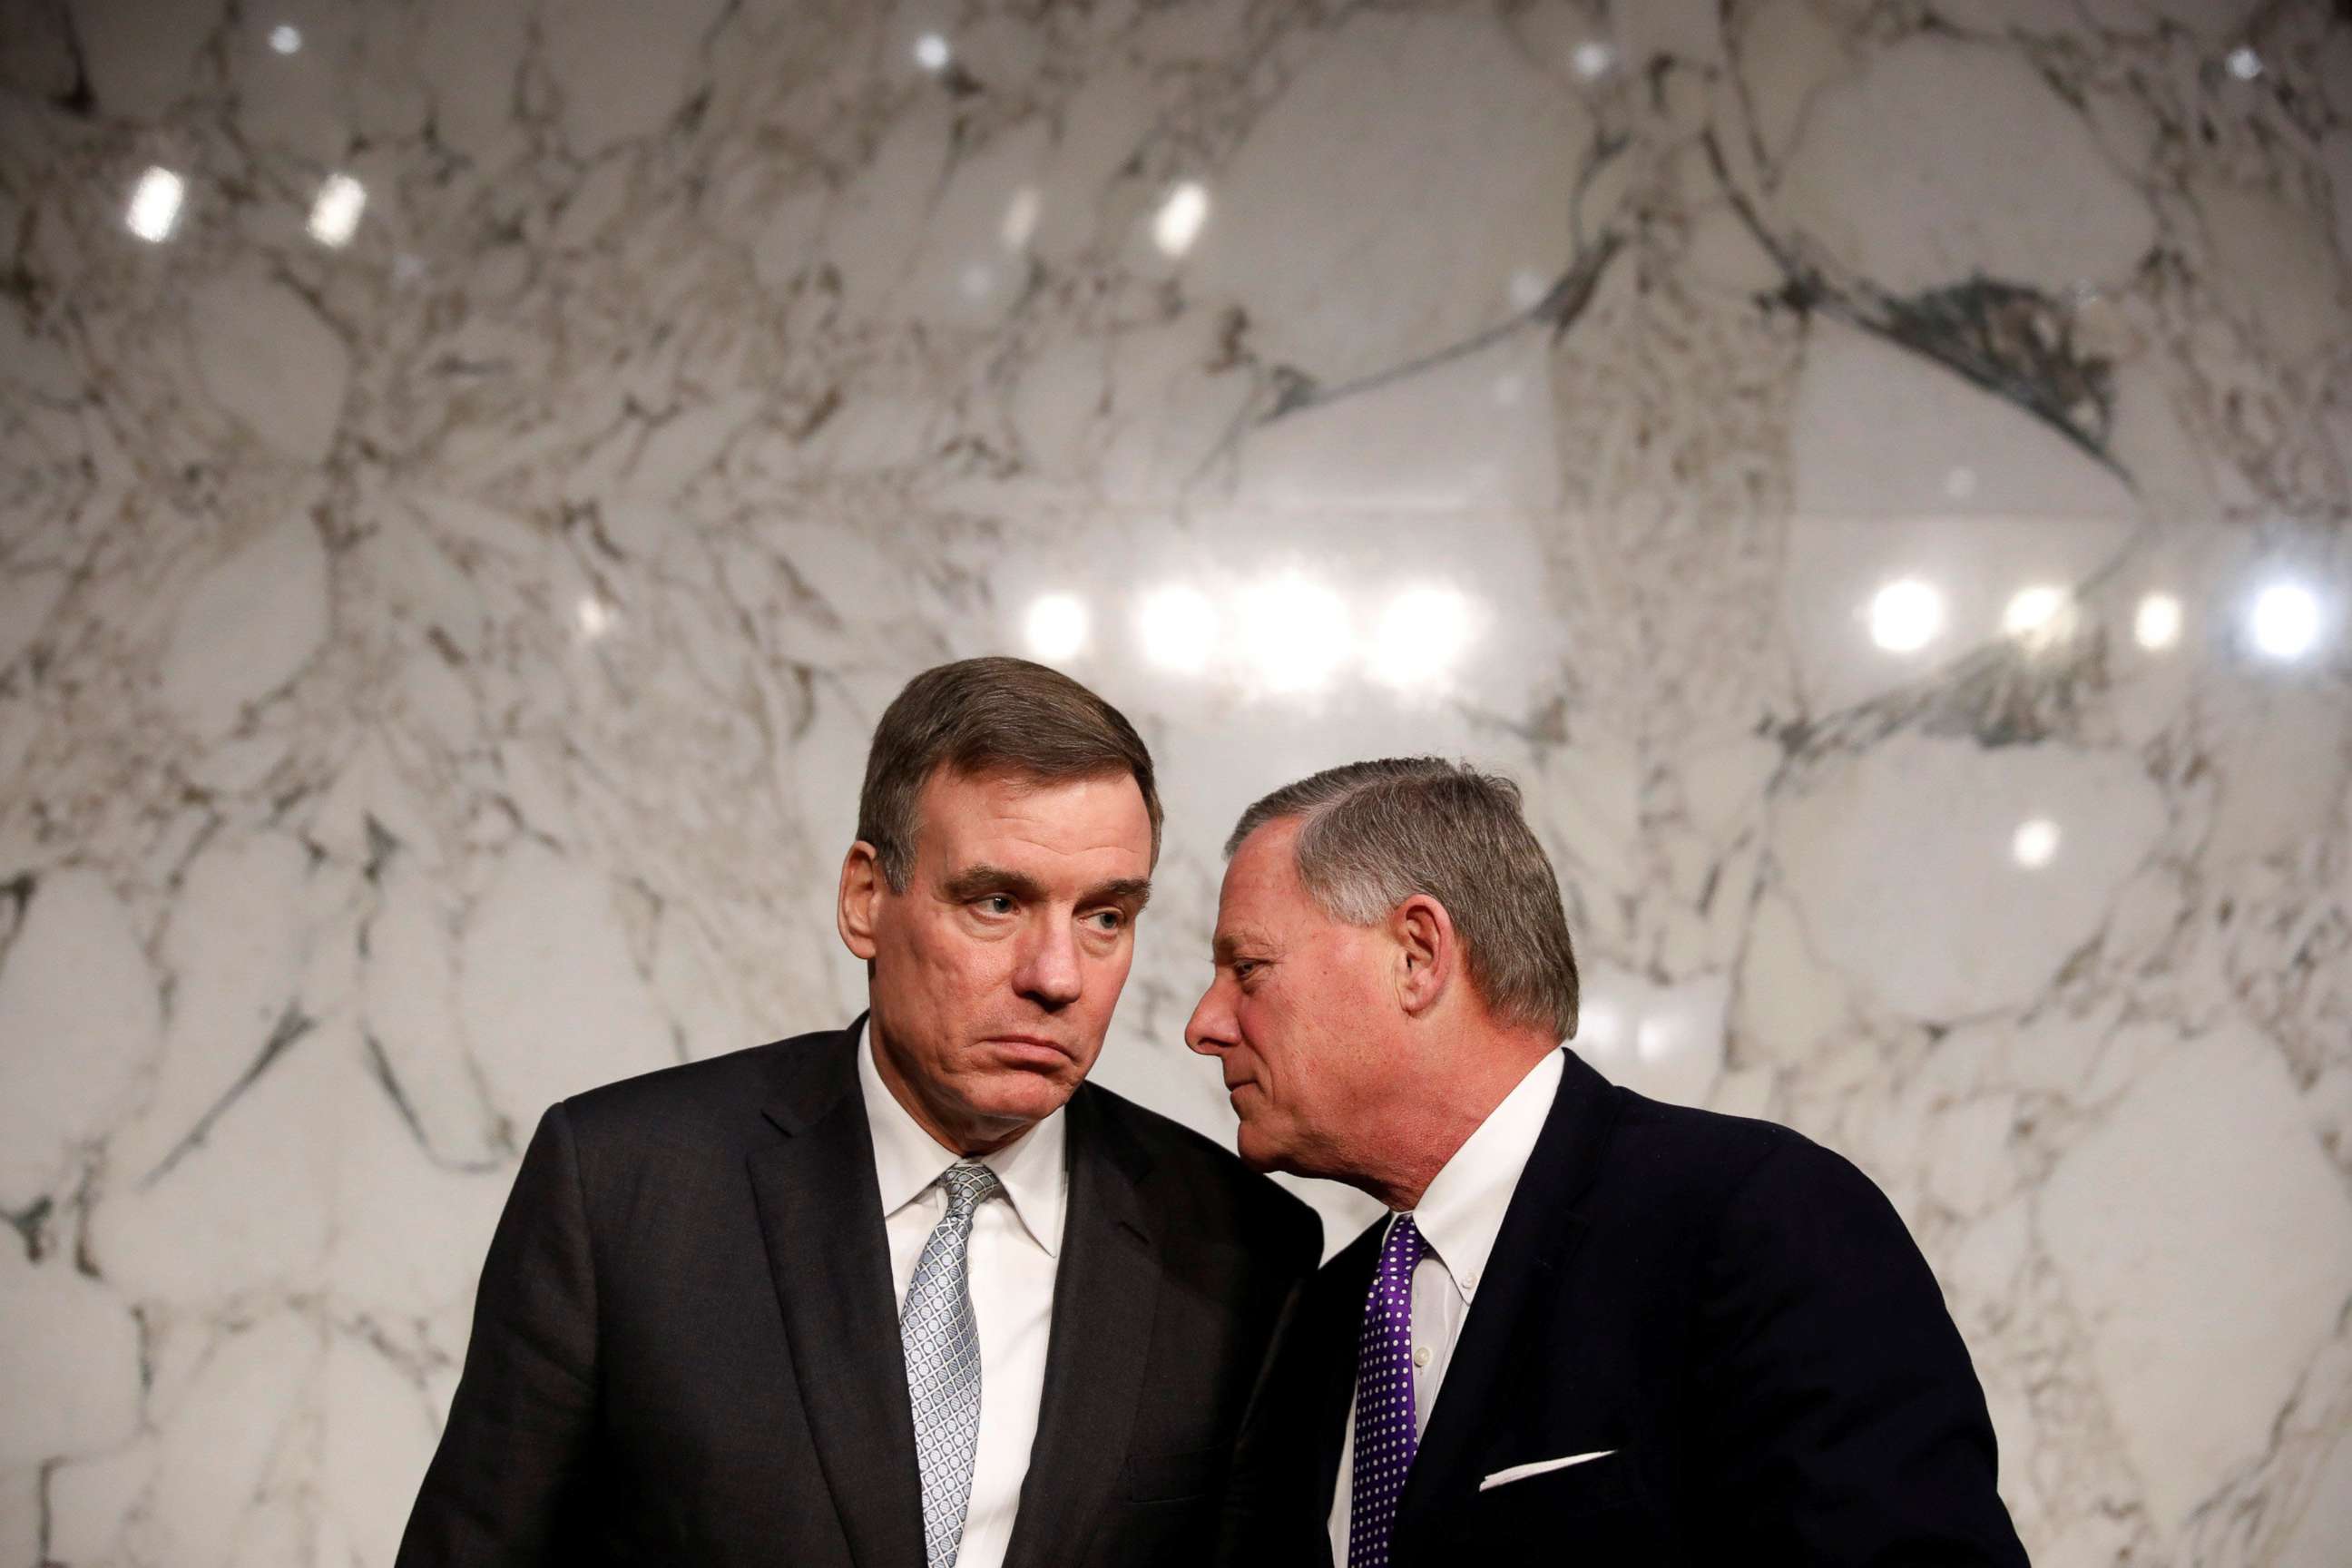 PHOTO: Sen. Mark Warner speaks with Sen. Richard Burr after a hearing of the Senate Intelligence Committee on Capitol Hill in Washington, Feb. 13, 2018.